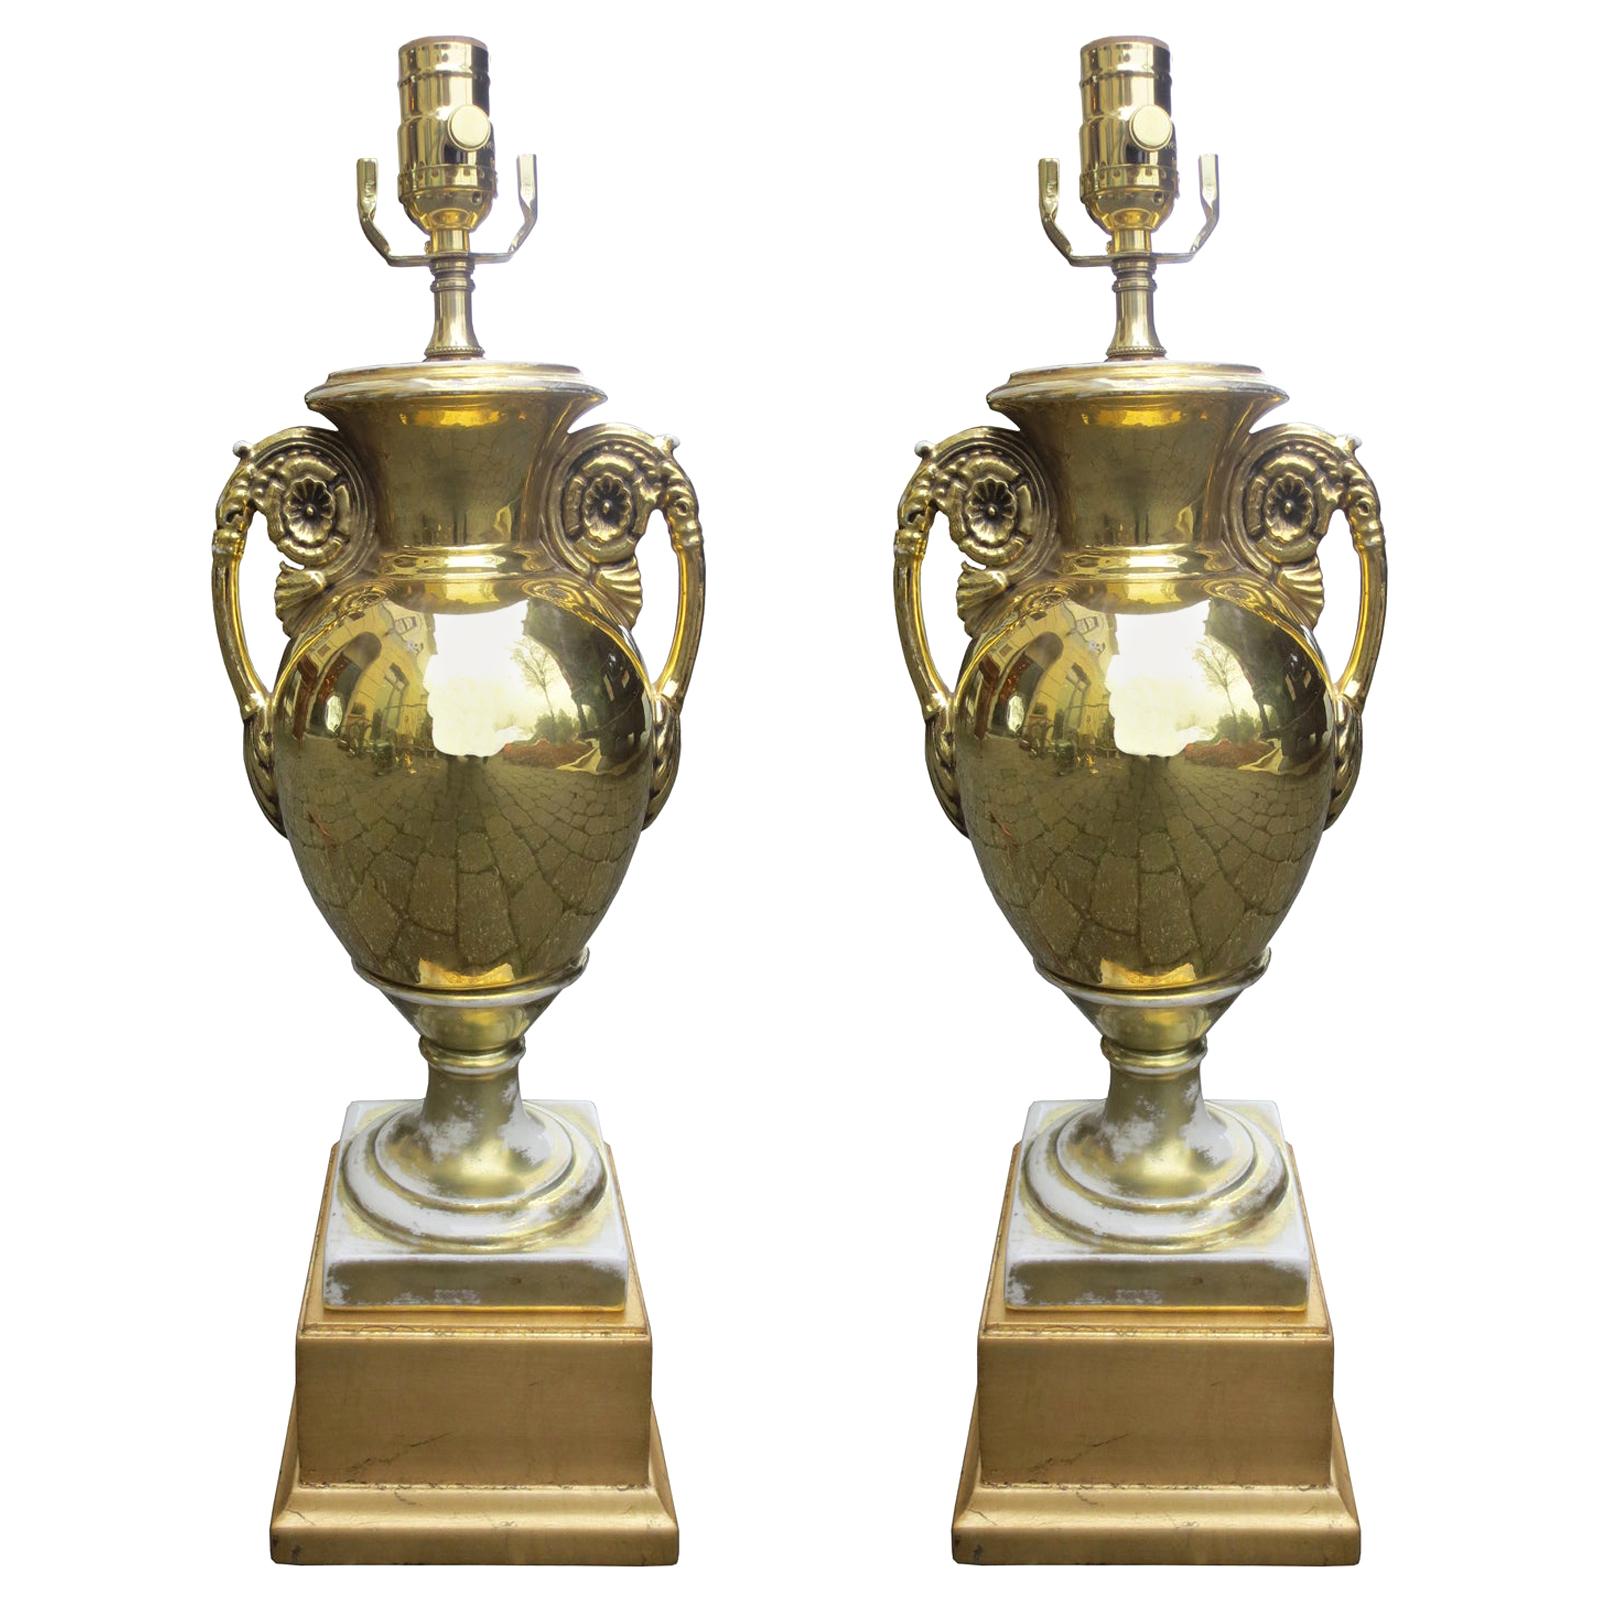 Pair of 19th-20th Century Old Paris Gilt Porcelain Urns as Lamps, Custom Bases